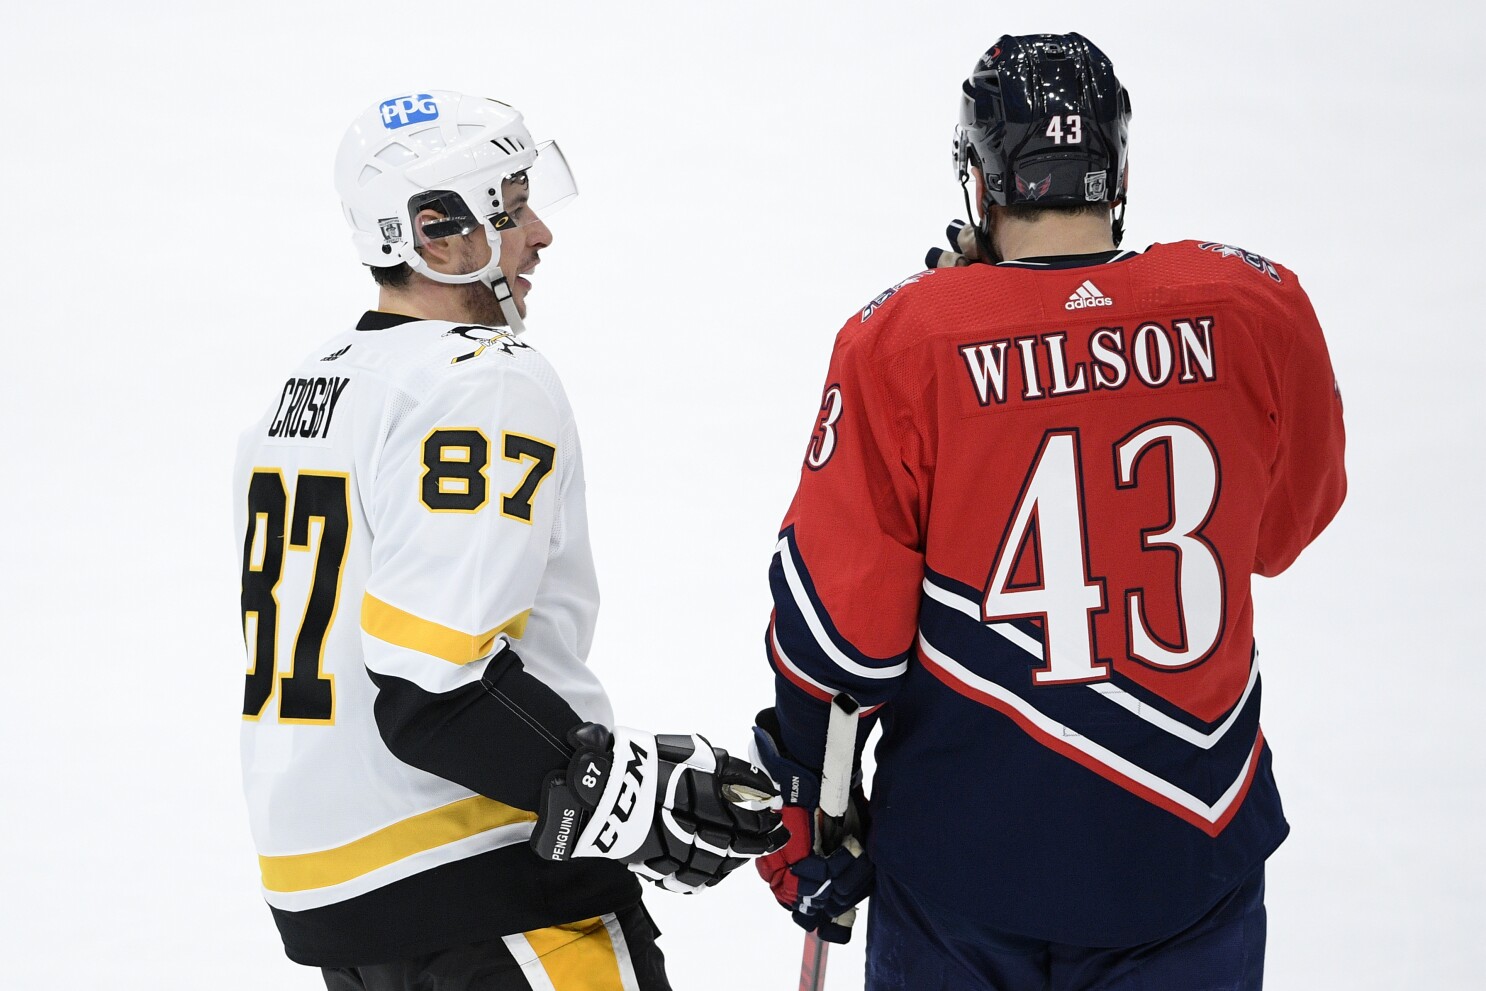 Crosby and Malkin lead the way as the Penguins beat the Capitals